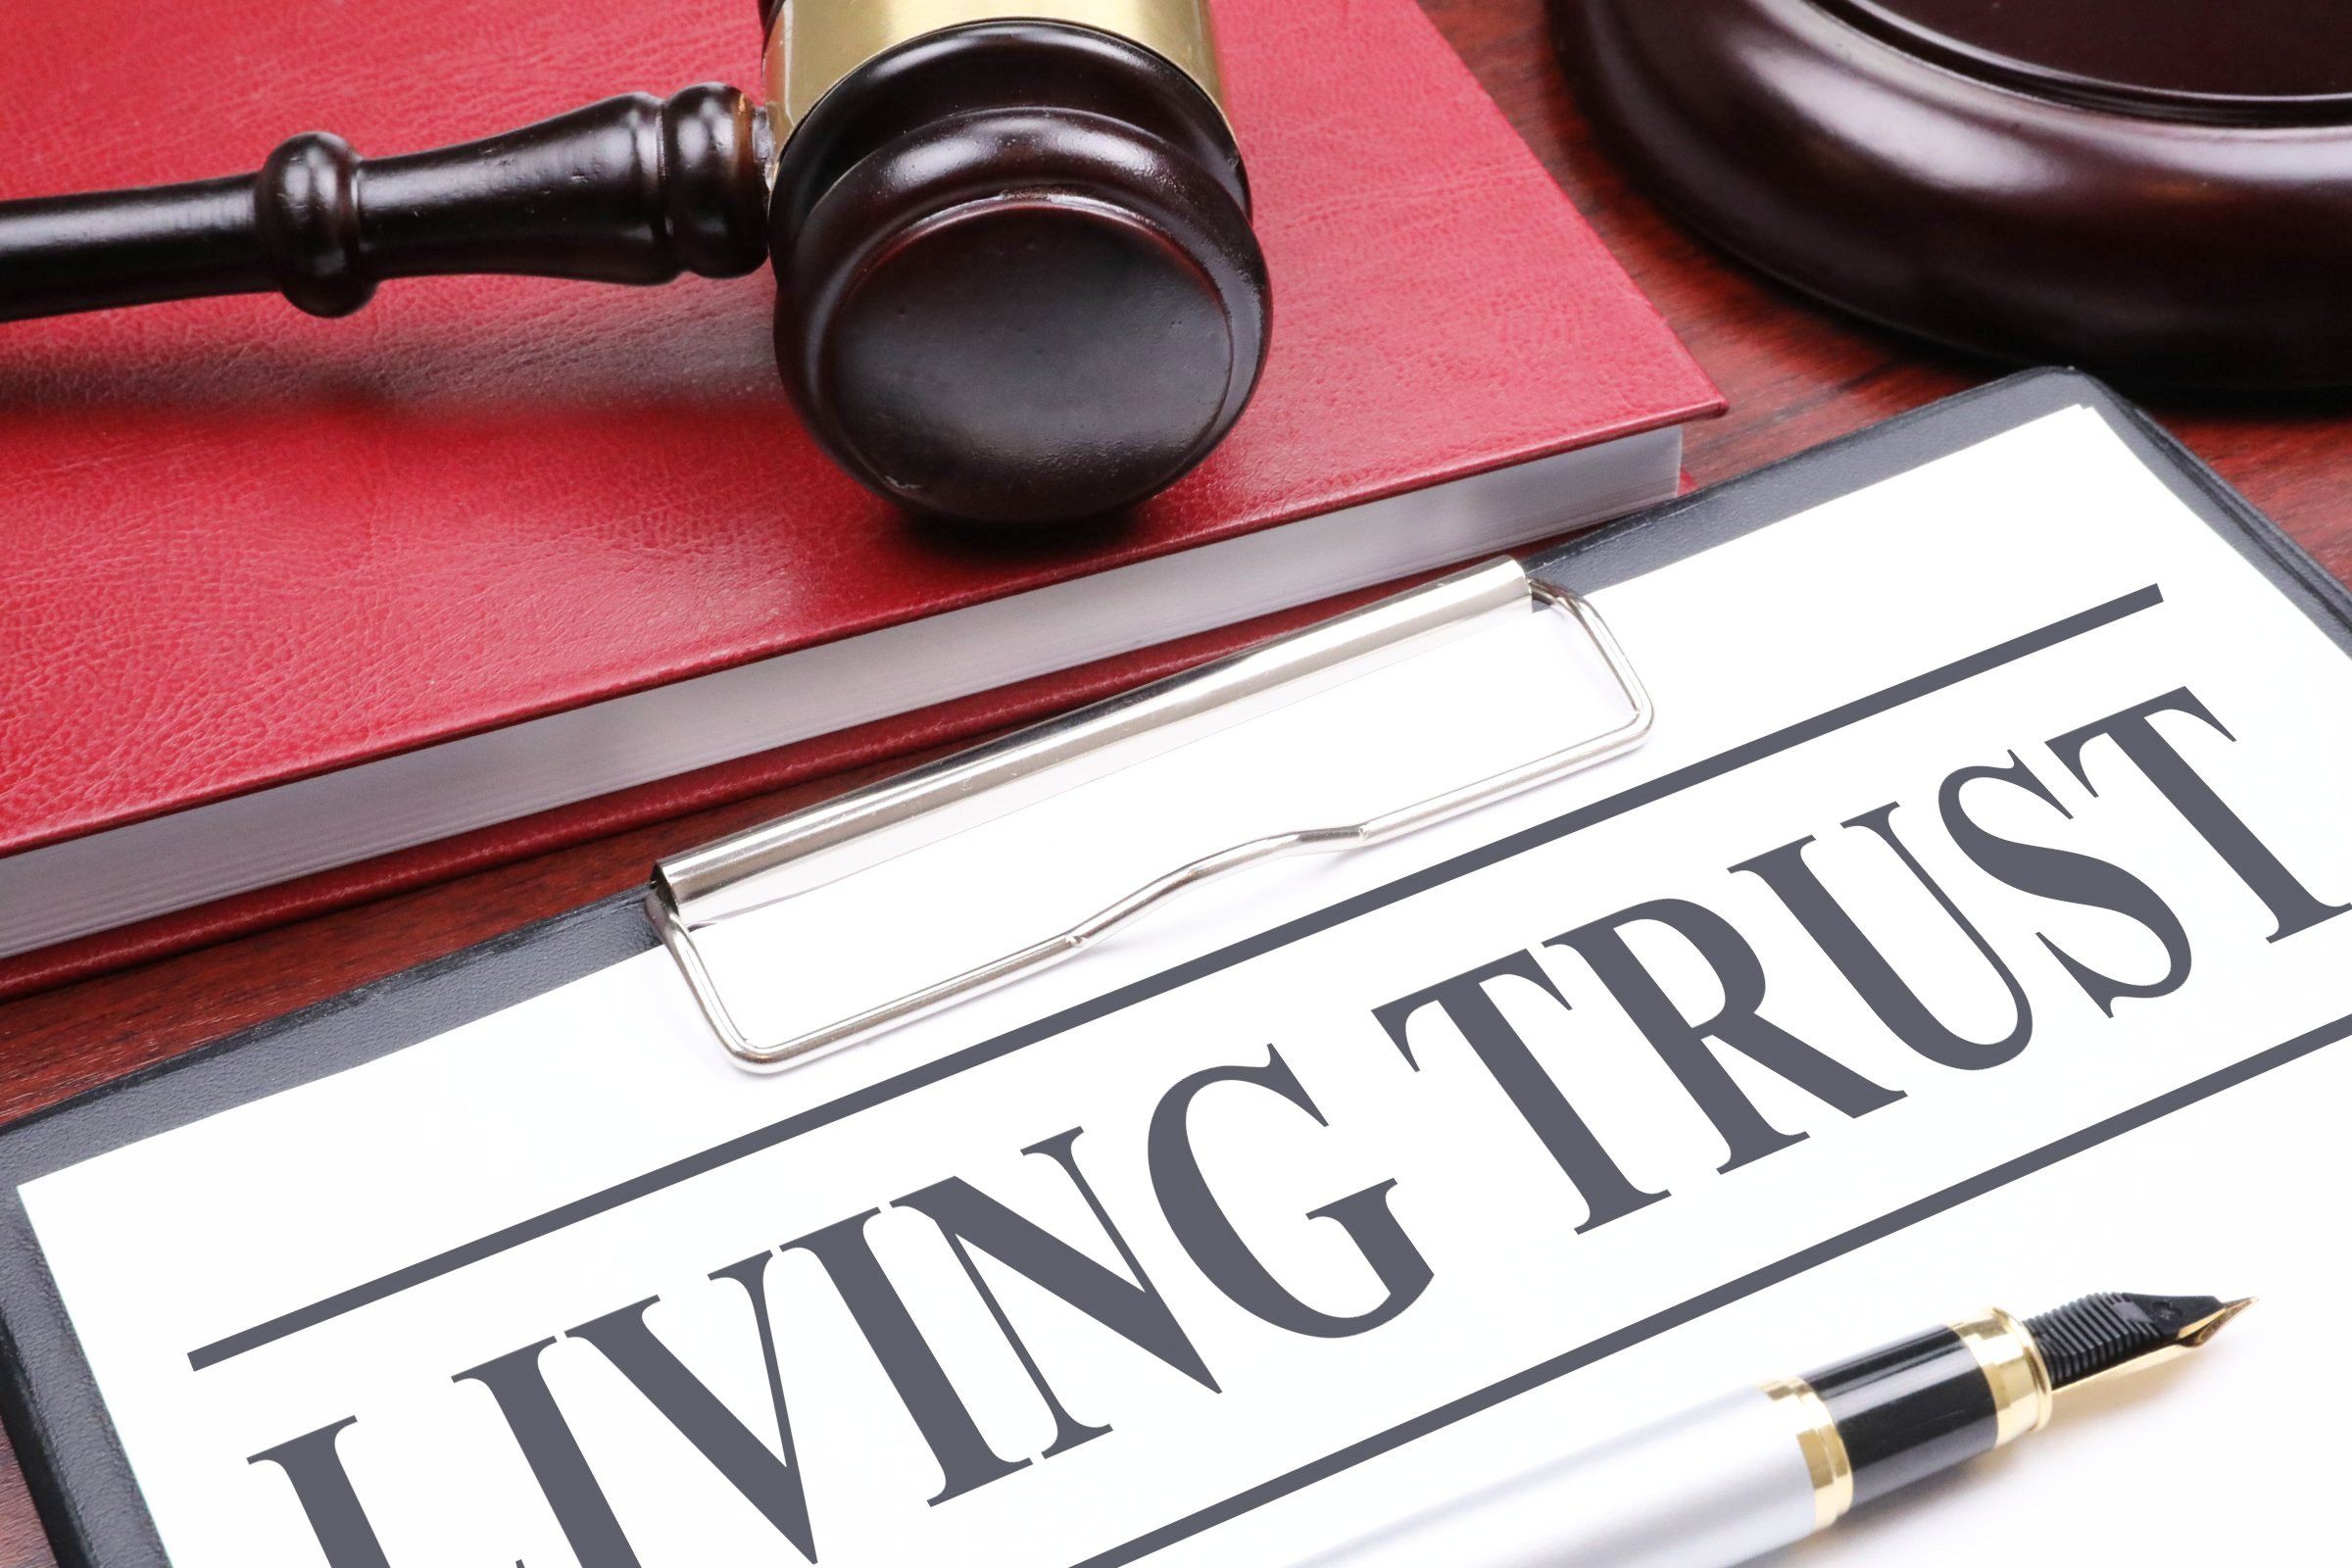 A Living Trust document on a desk with pen and gavel